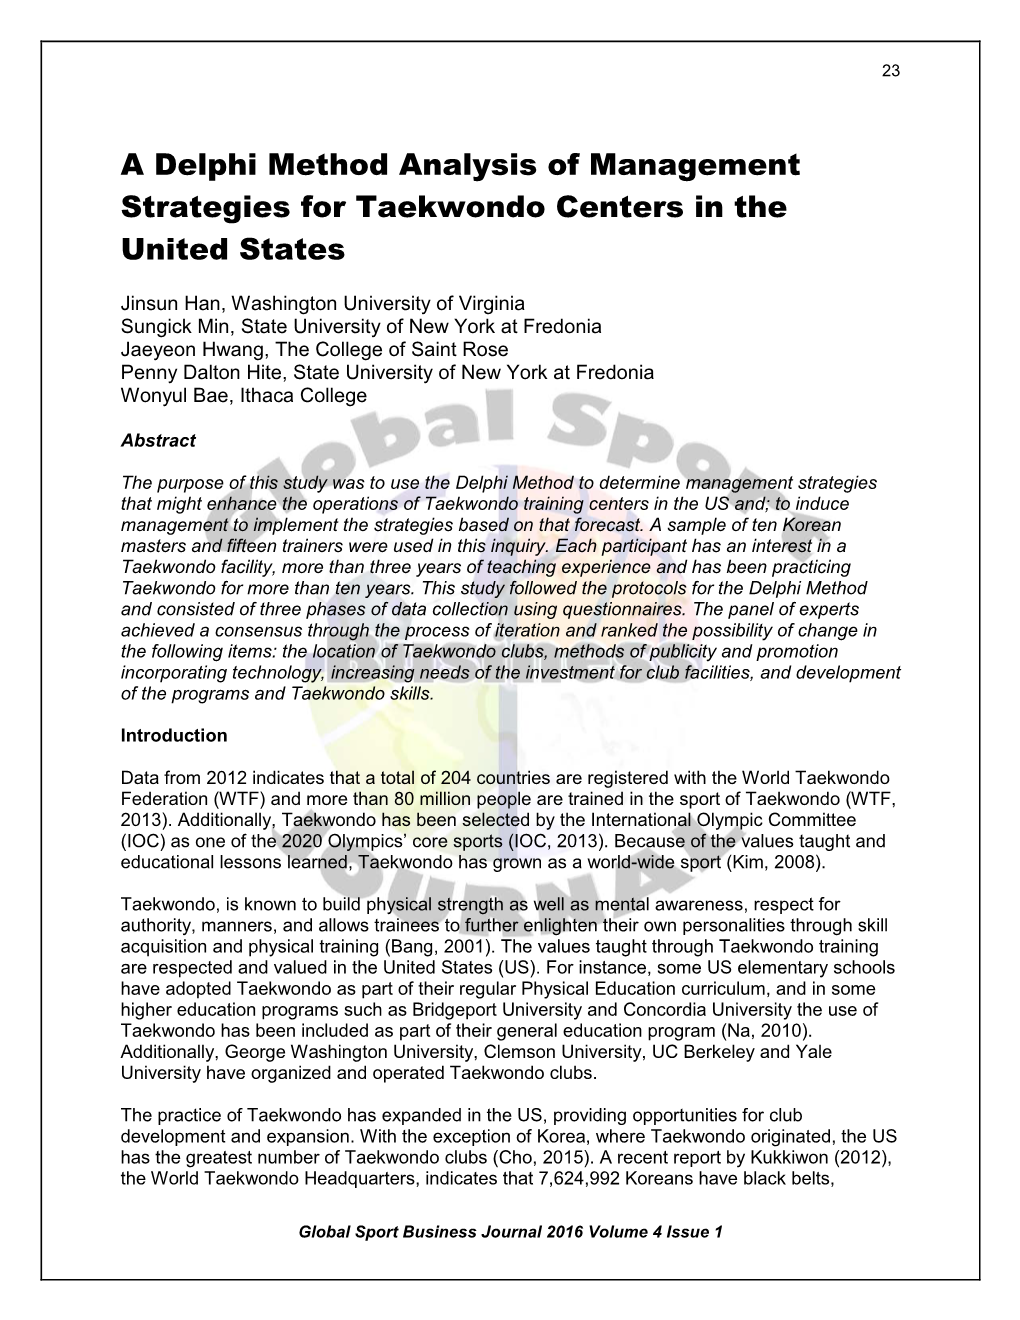 A Delphi Method Analysis of Management Strategies for Taekwondo Centers in the United States